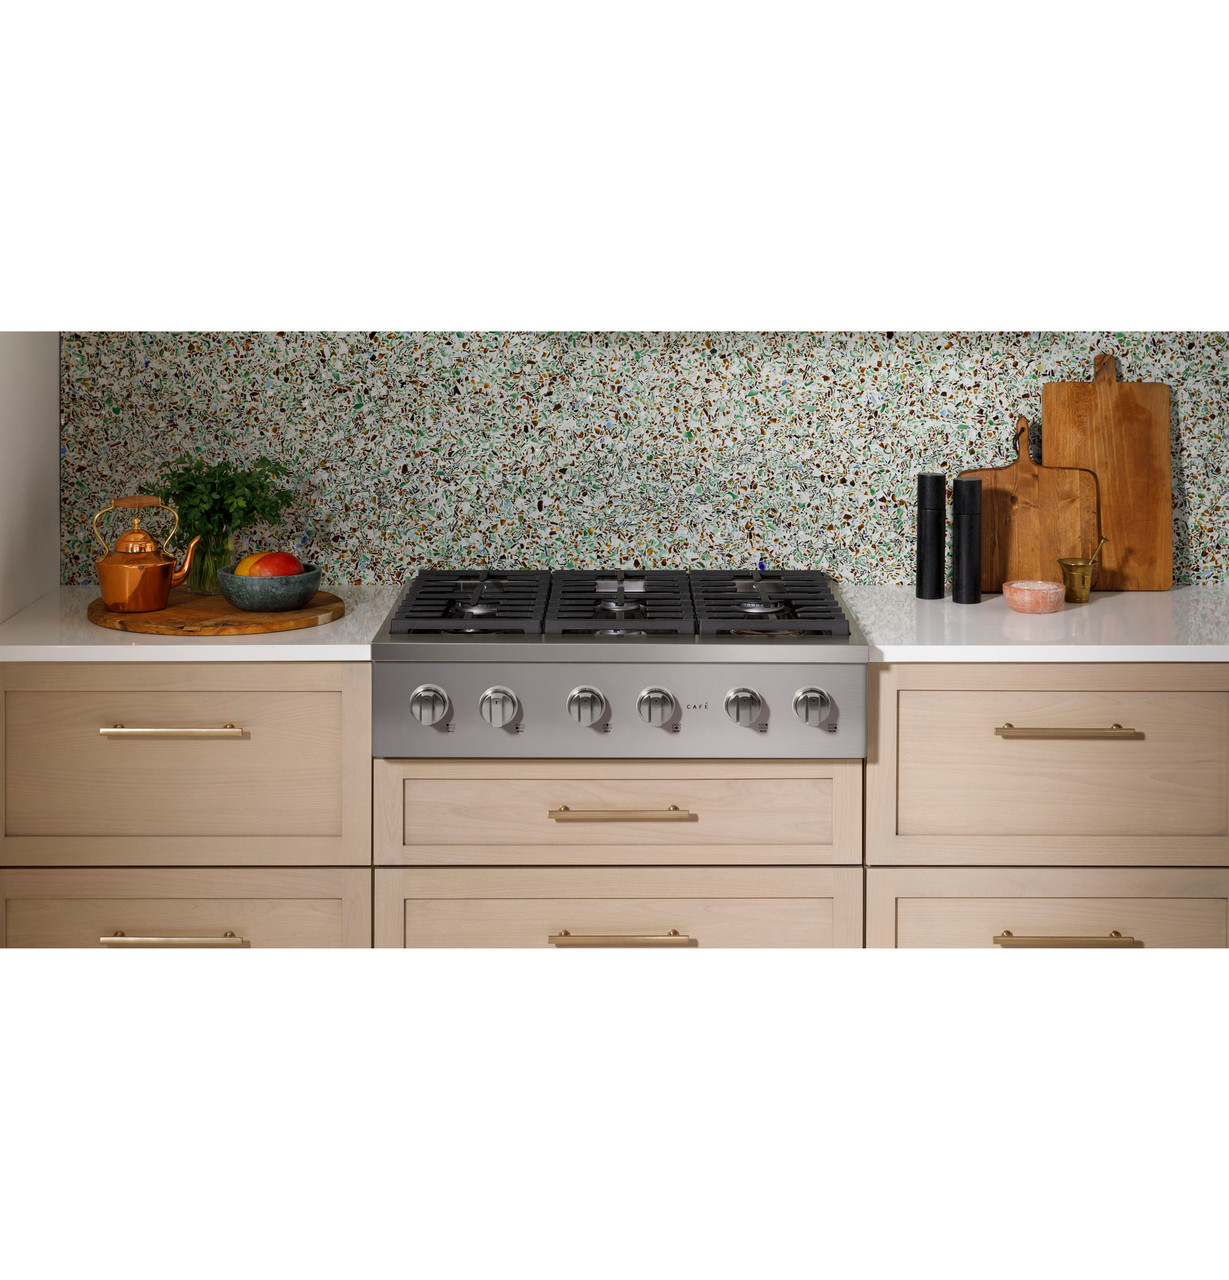 Café™ 36 Commercial-Style Gas Rangetop with 6 Burners (Natural Gas) -  CGU366P2TS1 - Cafe Appliances